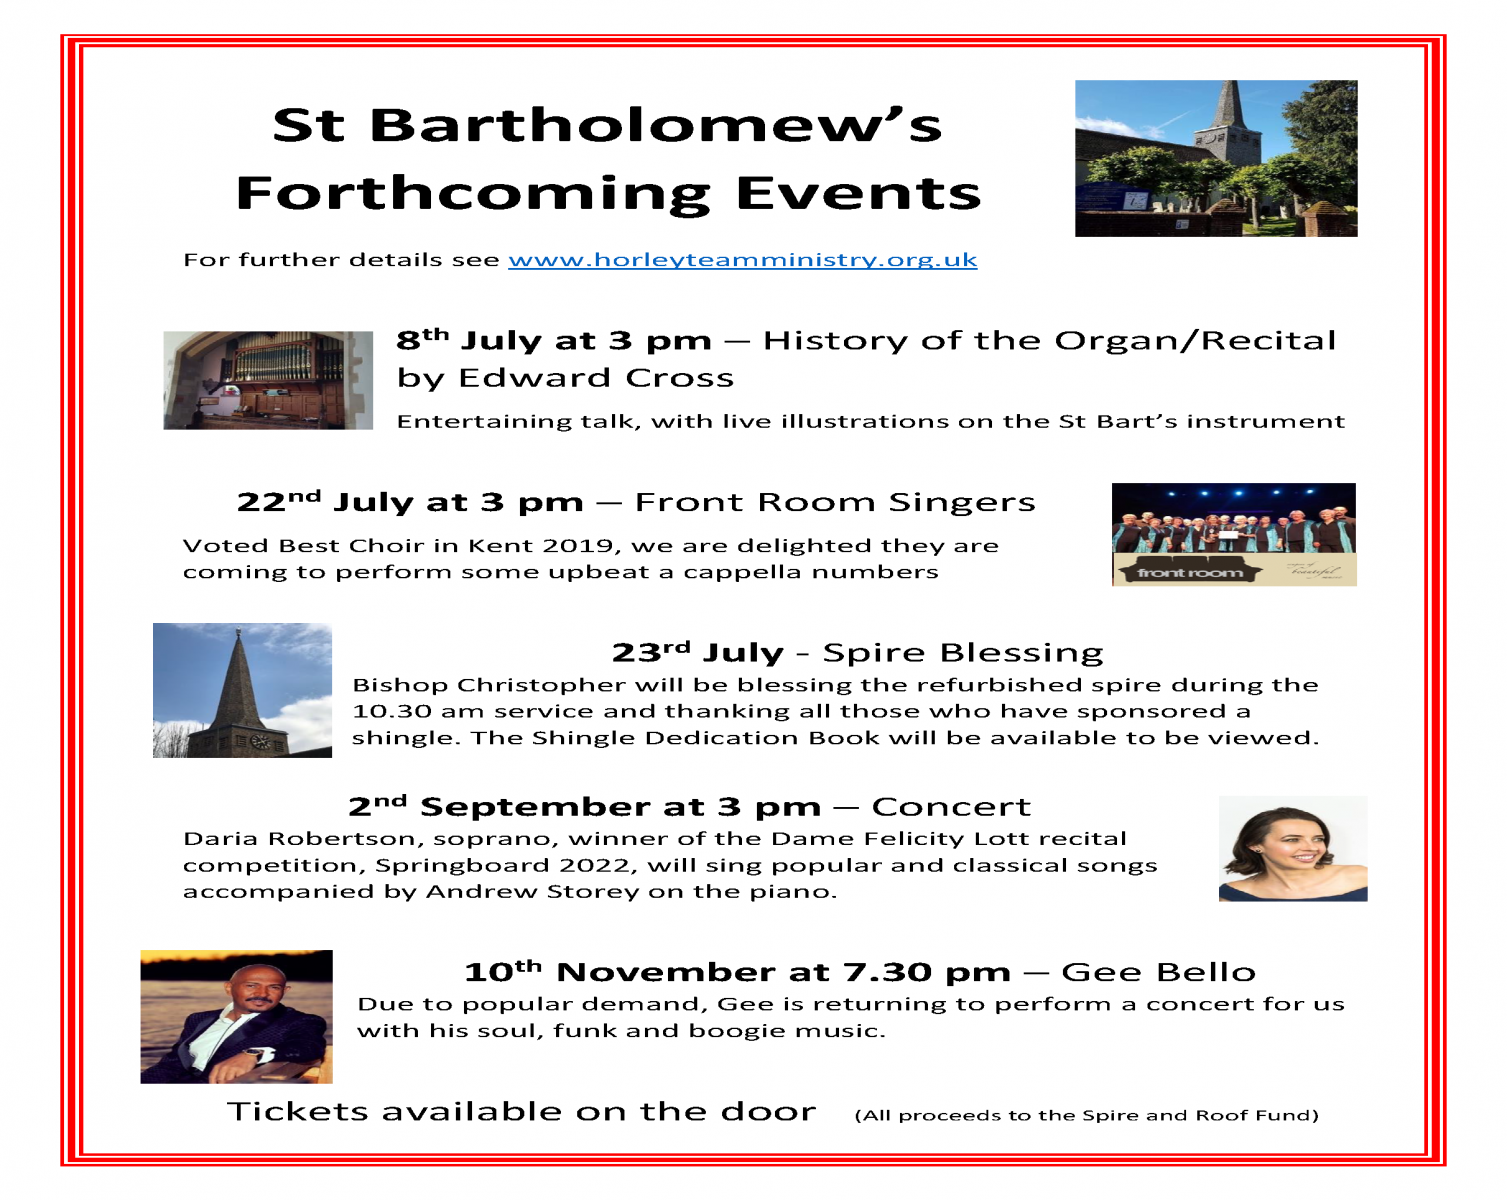 St Bartholomew's Forthcoming Events For further details see www.horleyteamministry.org.uk 8th July at 3 pm – History of the Organ/Recital by Edward Cross Entertaining talk, with live illustrations on the St Bart’s instrument 22nd July at 3 pm – Front Room Singers Voted Best Choir in Kent 2019, we are delighted they are coming to perform some upbeat a cappella numbers 23rd July - Spire Blessing Bishop Christopher will be blessing the refurbished spire during the 10.30 am service and thanking all those who have sponsored a shingle. The Shingle Dedication Book will be available to be viewed. 2nd September at 3 pm – Concert Daria Robertson, soprano, winner of the Dame Felicity Lott recital competition, Springboard 2022, will sing popular and classical songs accompanied by Andrew Storey on the piano. 10th November at 7.30 pm – Gee Bello Due to popular demand, Gee is returning to perform a concert for us with his soul, funk and boogie music. Tickets available on the door (All proceeds to the Spire and Roof Fund)